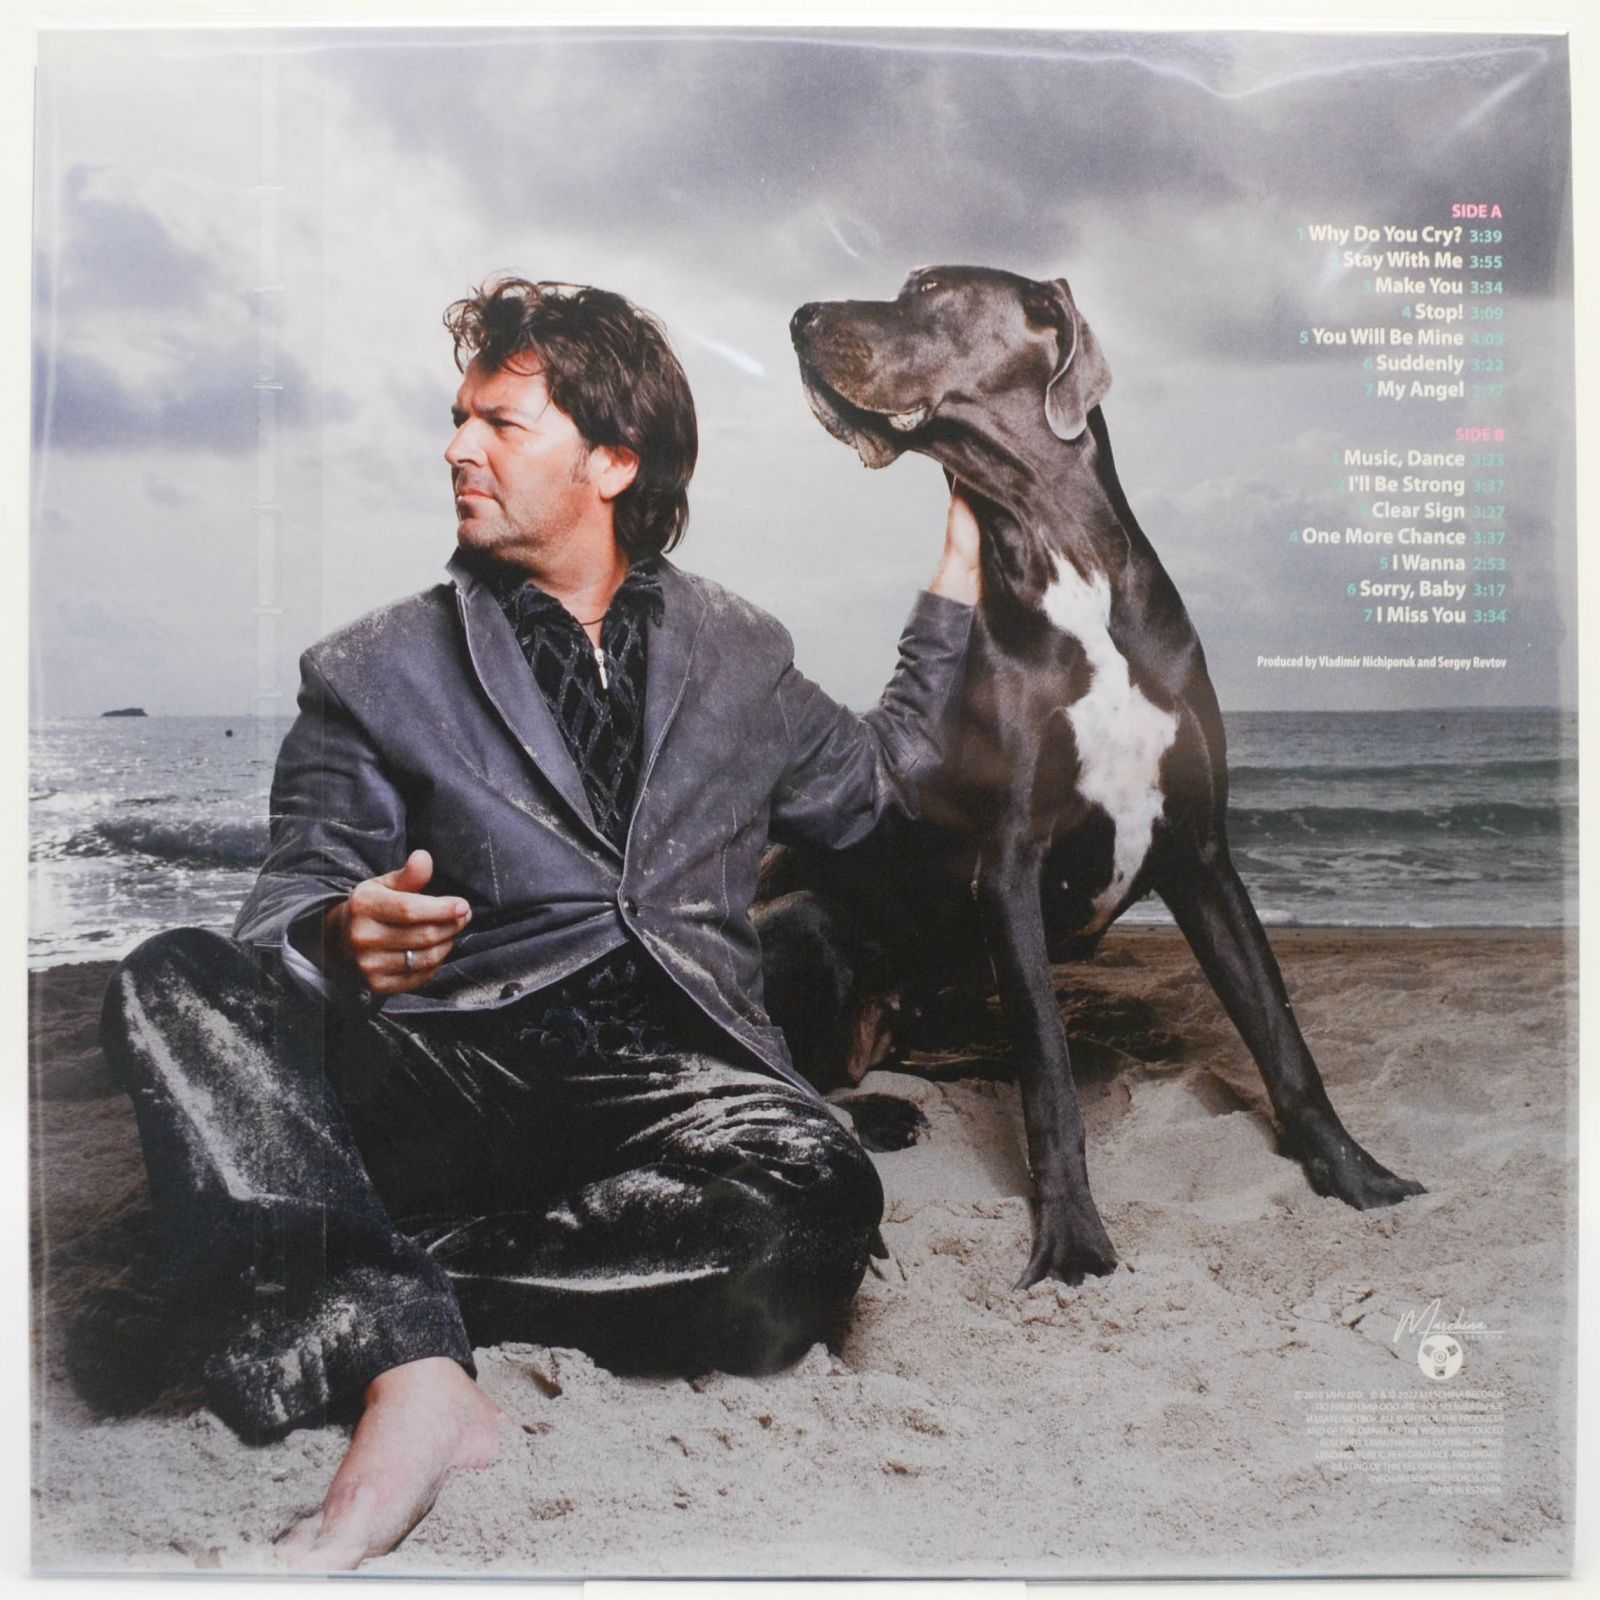 Thomas Anders — Strong, 2010